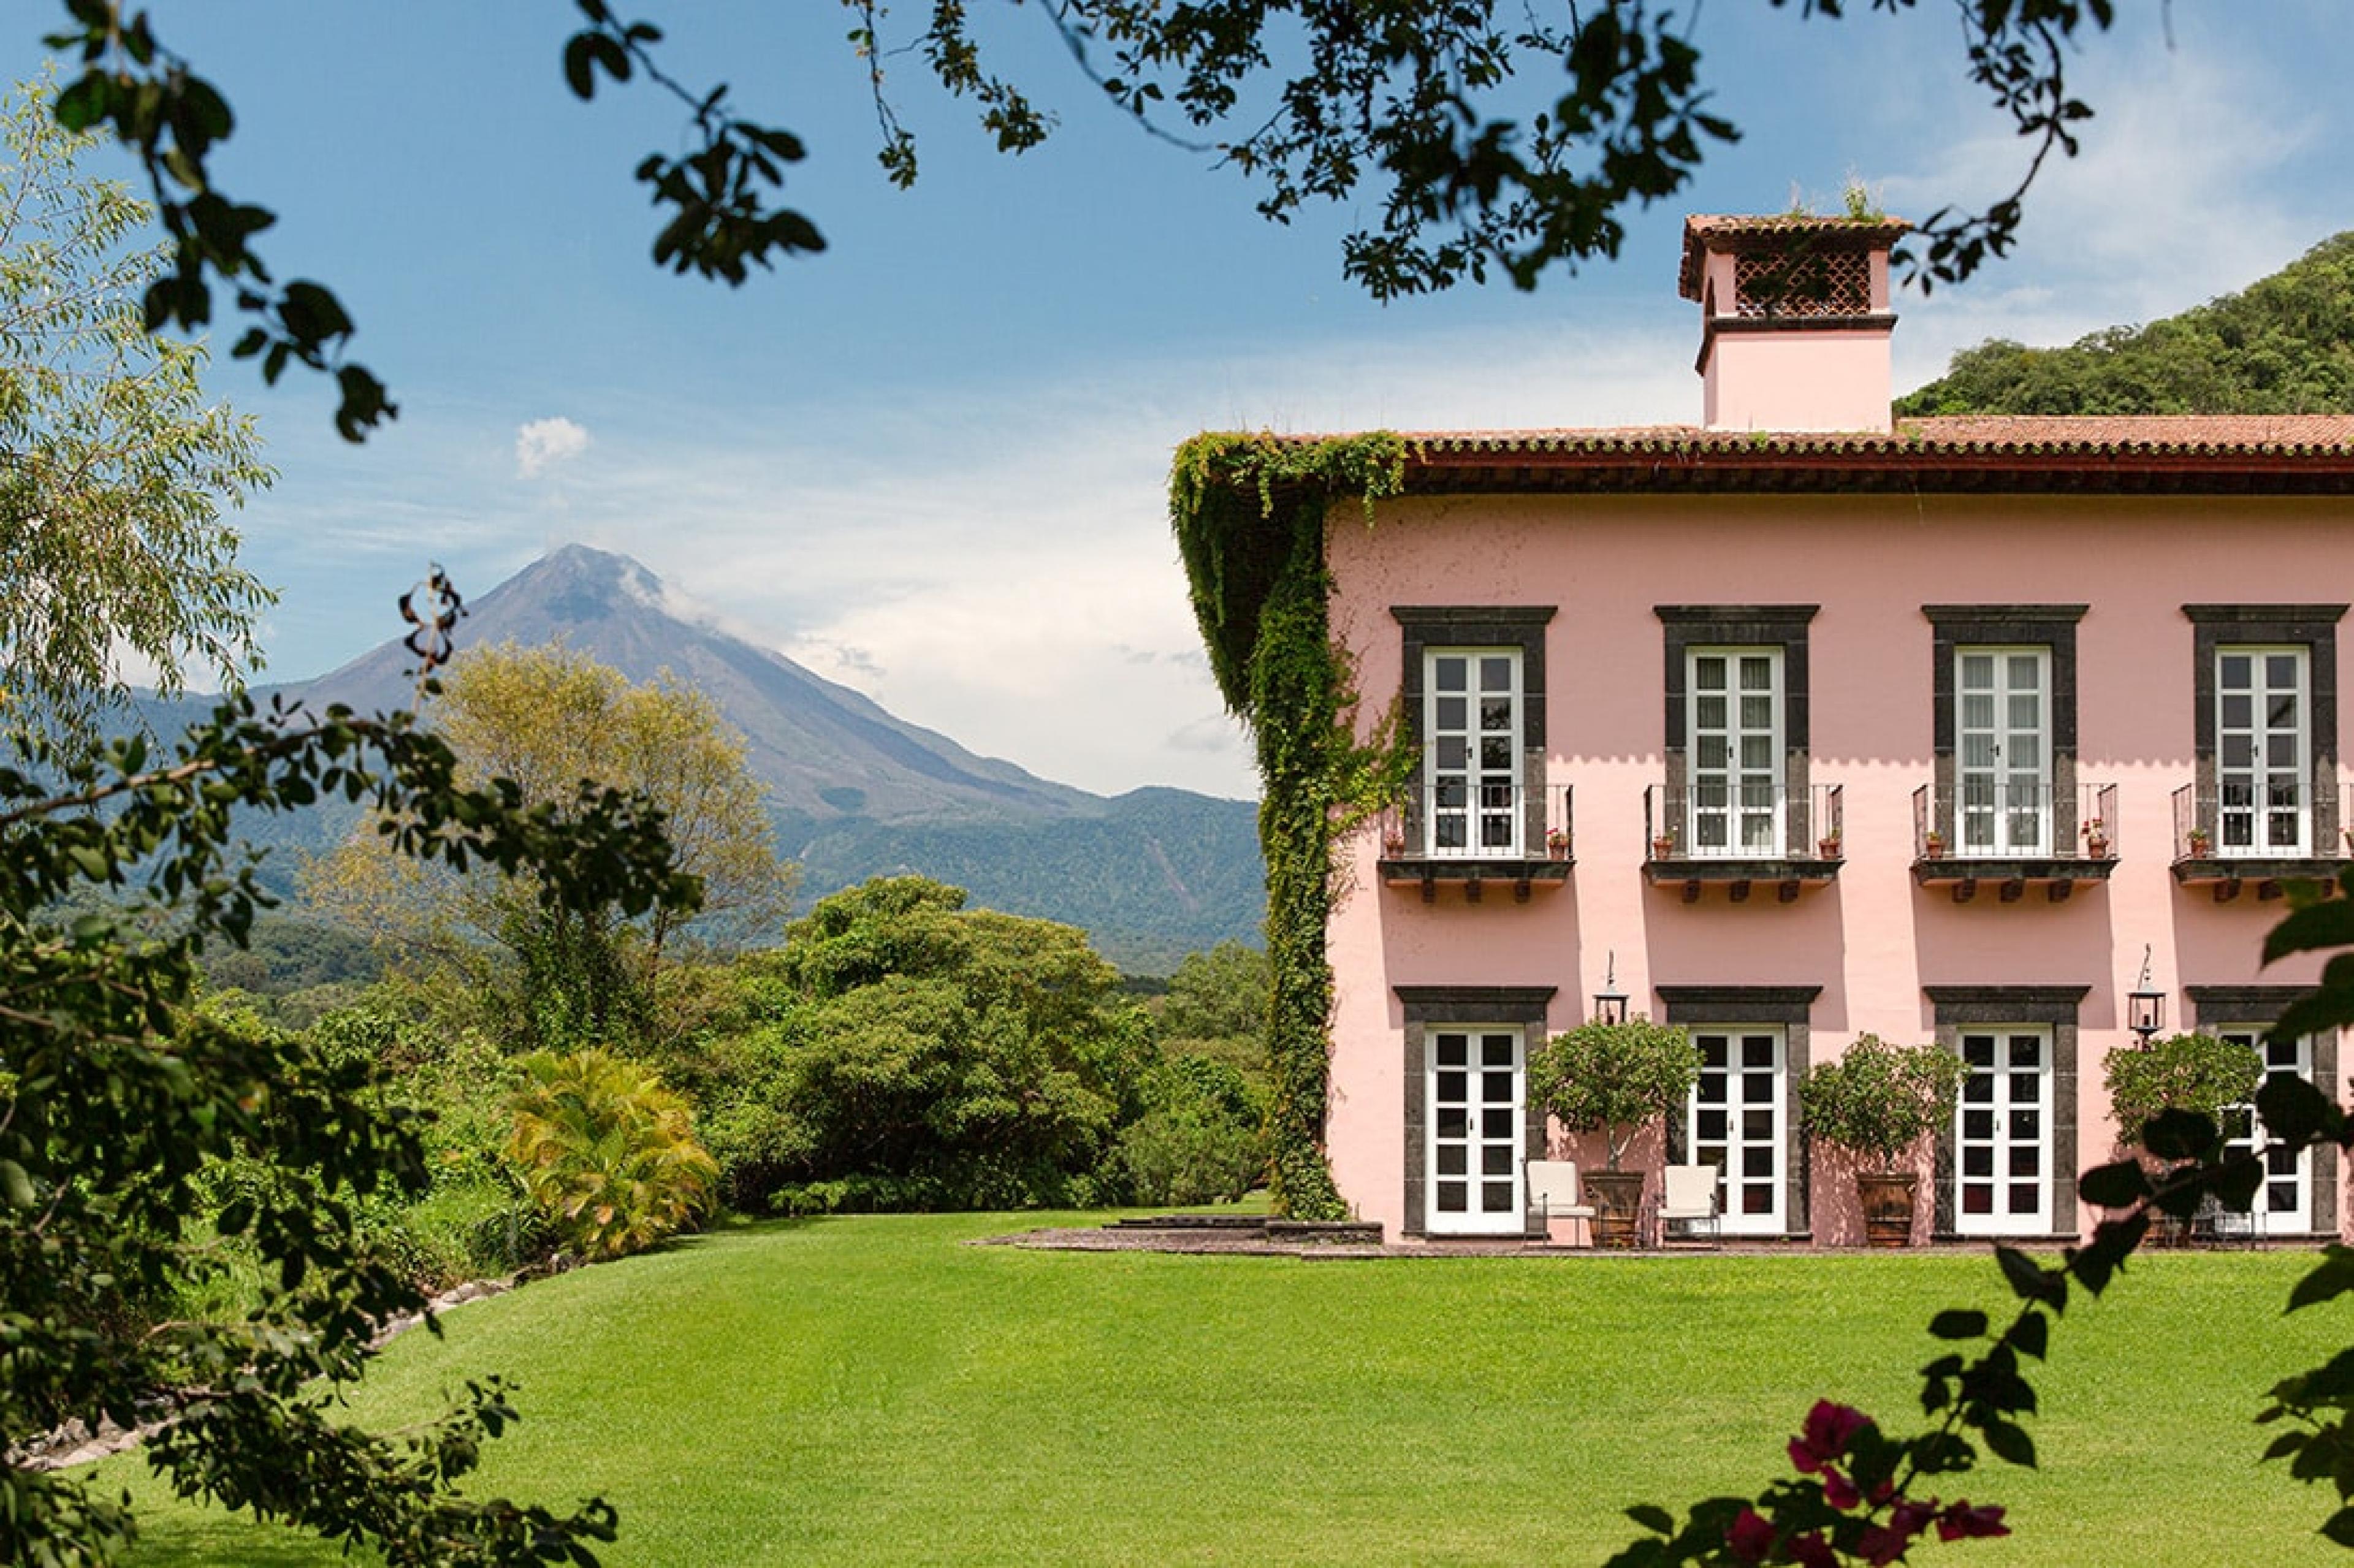 spanish colonial pink hacienda at top of lawn with volcano in the background